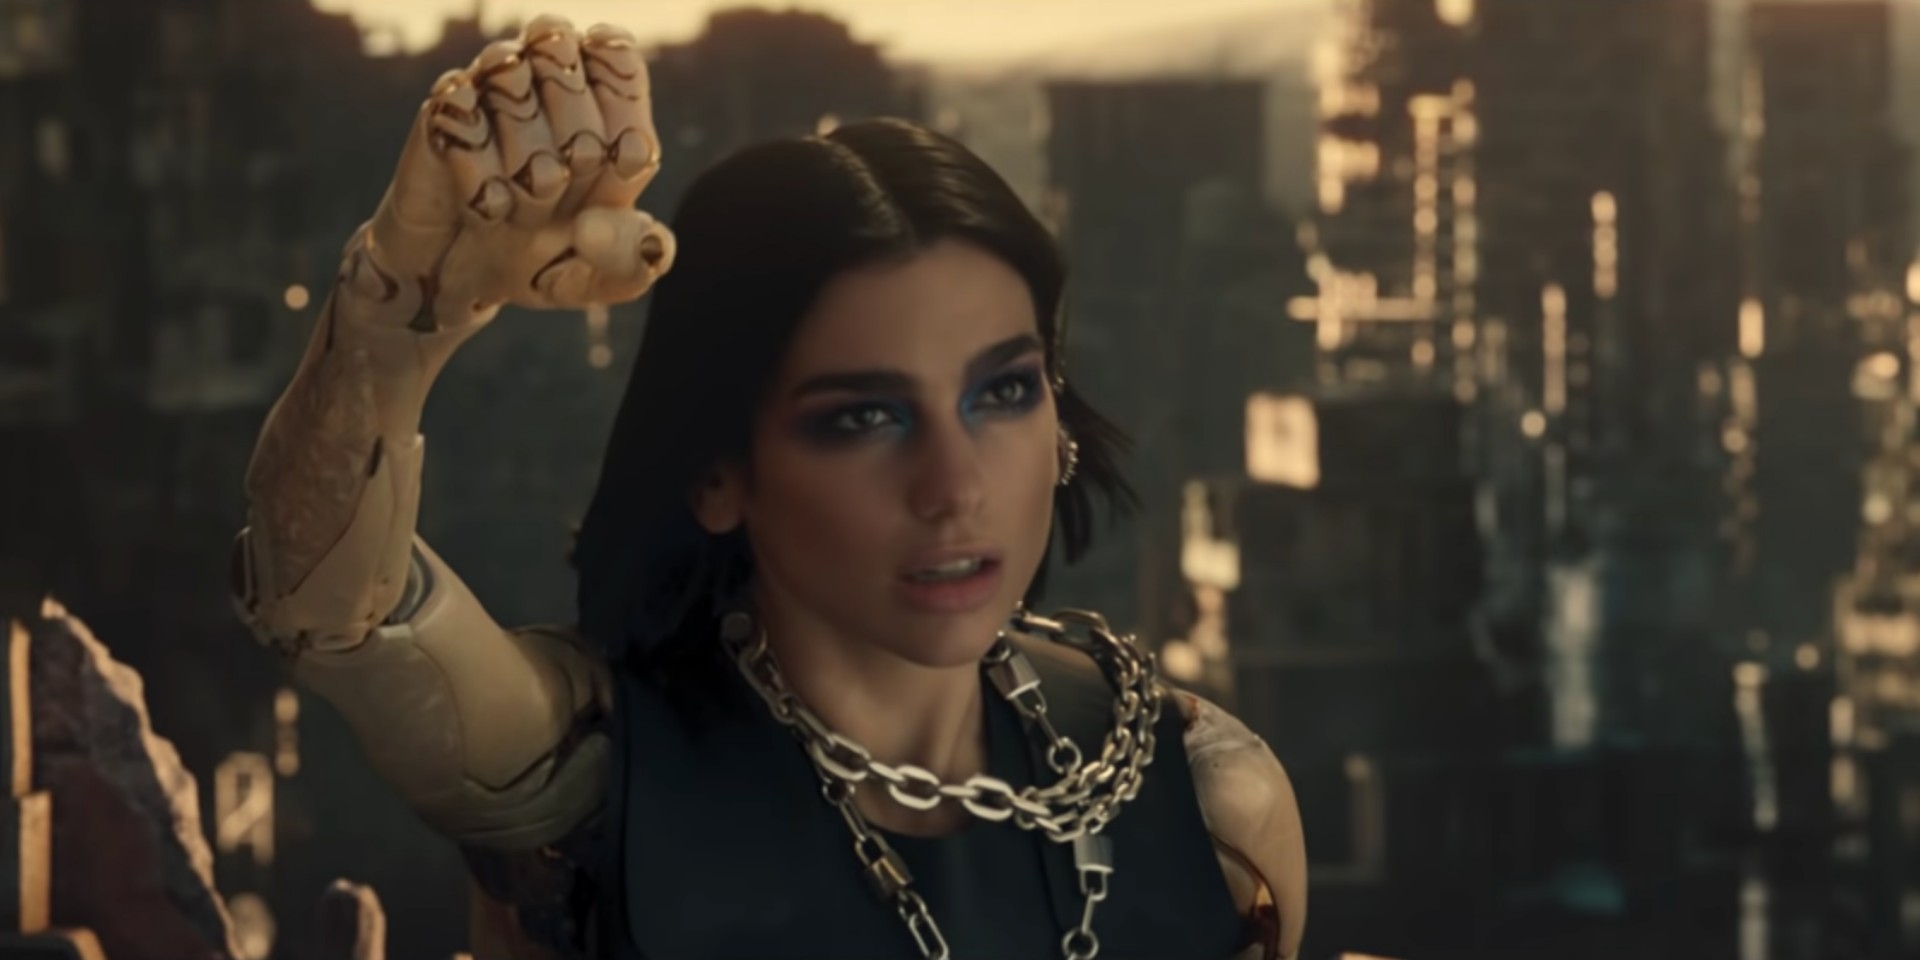 Dua Lipa releases powerful protest anthem 'Swan Song', shares music video